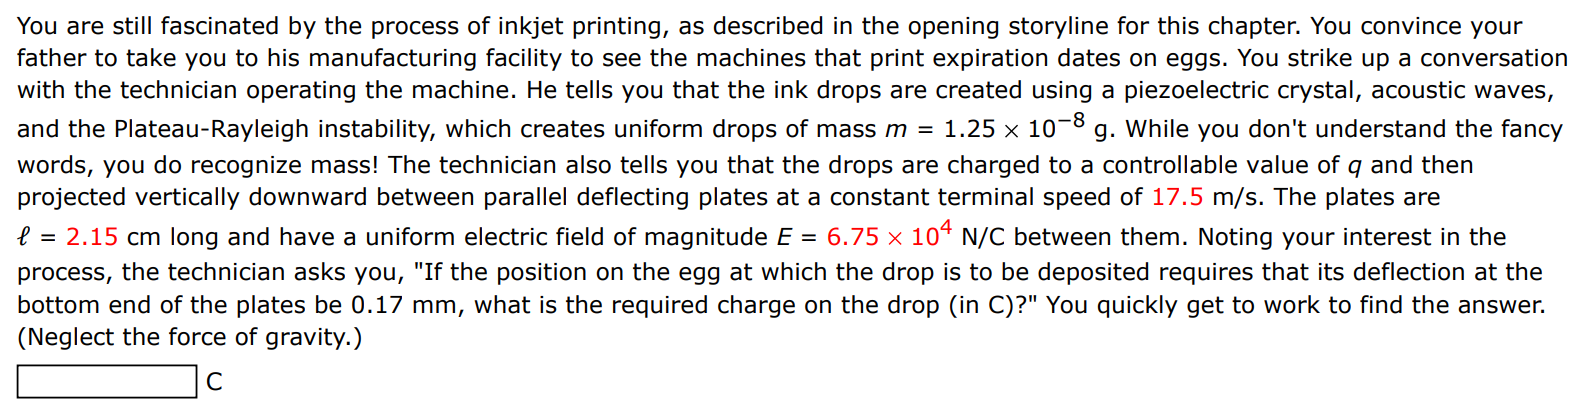 You are still fascinated by the process of inkjet printing, as described in the opening storyline for this chapter. You convince your father to take you to his manufacturing facility to see the machines that print expiration dates on eggs. You strike up a conversation with the technician operating the machine. He tells you that the ink drops are created using a piezoelectric crystal, acoustic waves, and the Plateau-Rayleigh instability, which creates uniform drops of mass m = 1.25×10−8 g. While you don't understand the fancy words, you do recognize mass! The technician also tells you that the drops are charged to a controllable value of q and then projected vertically downward between parallel deflecting plates at a constant terminal speed of 17.5 m/s. The plates are ℓ = 2.15 cm long and have a uniform electric field of magnitude E = 6.75×104 N/C between them. Noting your interest in the process, the technician asks you, "If the position on the egg at which the drop is to be deposited requires that its deflection at the bottom end of the plates be 0.17 mm, what is the required charge on the drop (in C)?" You quickly get to work to find the answer. (Neglect the force of gravity.) C 